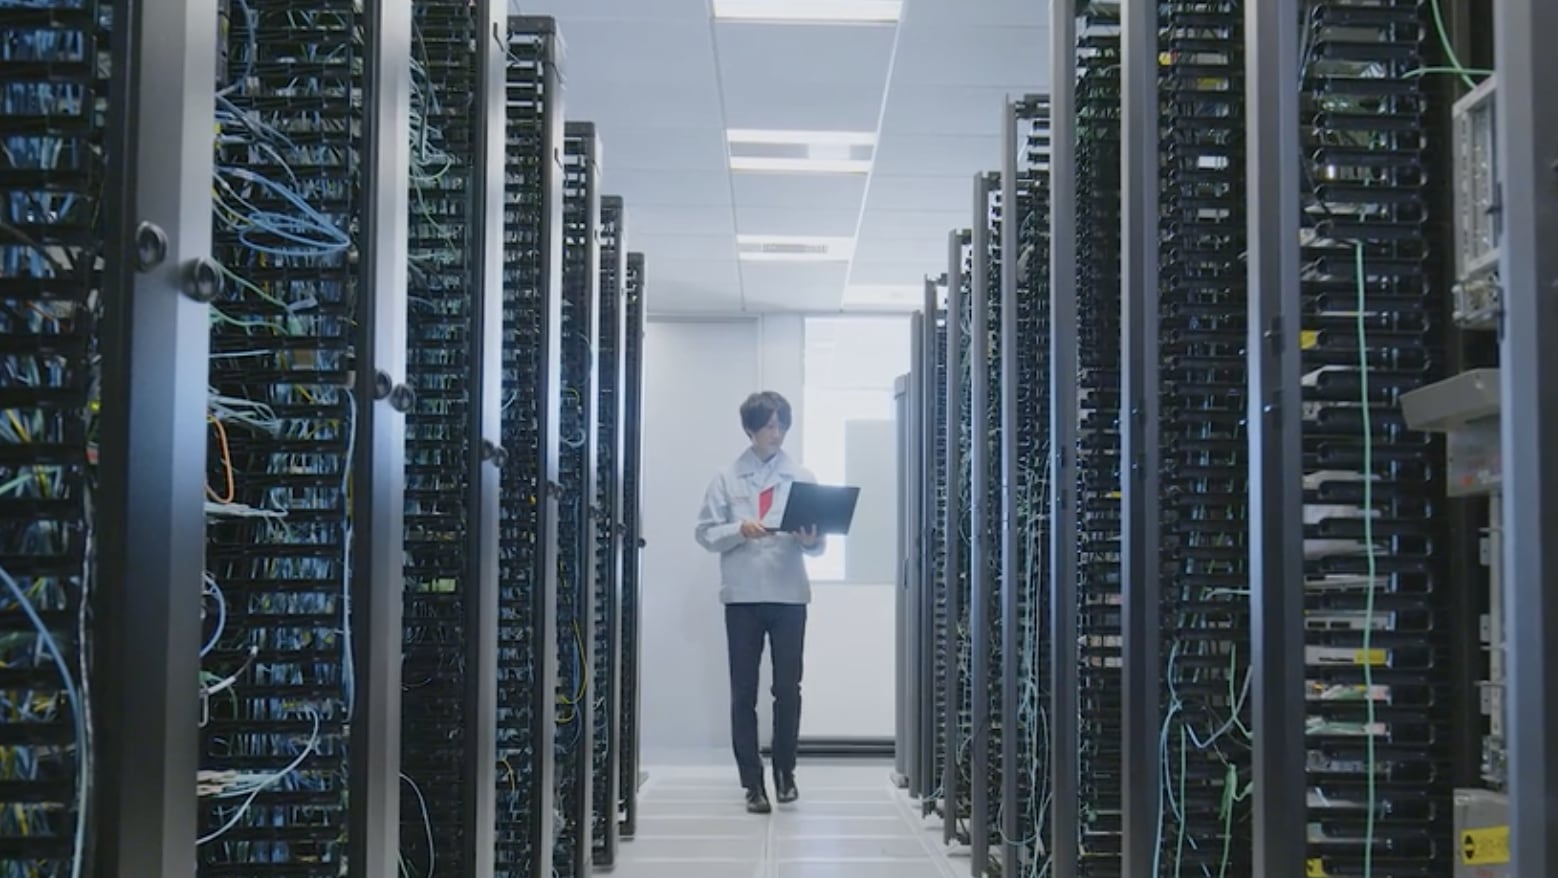 Man in server room holding a laptop